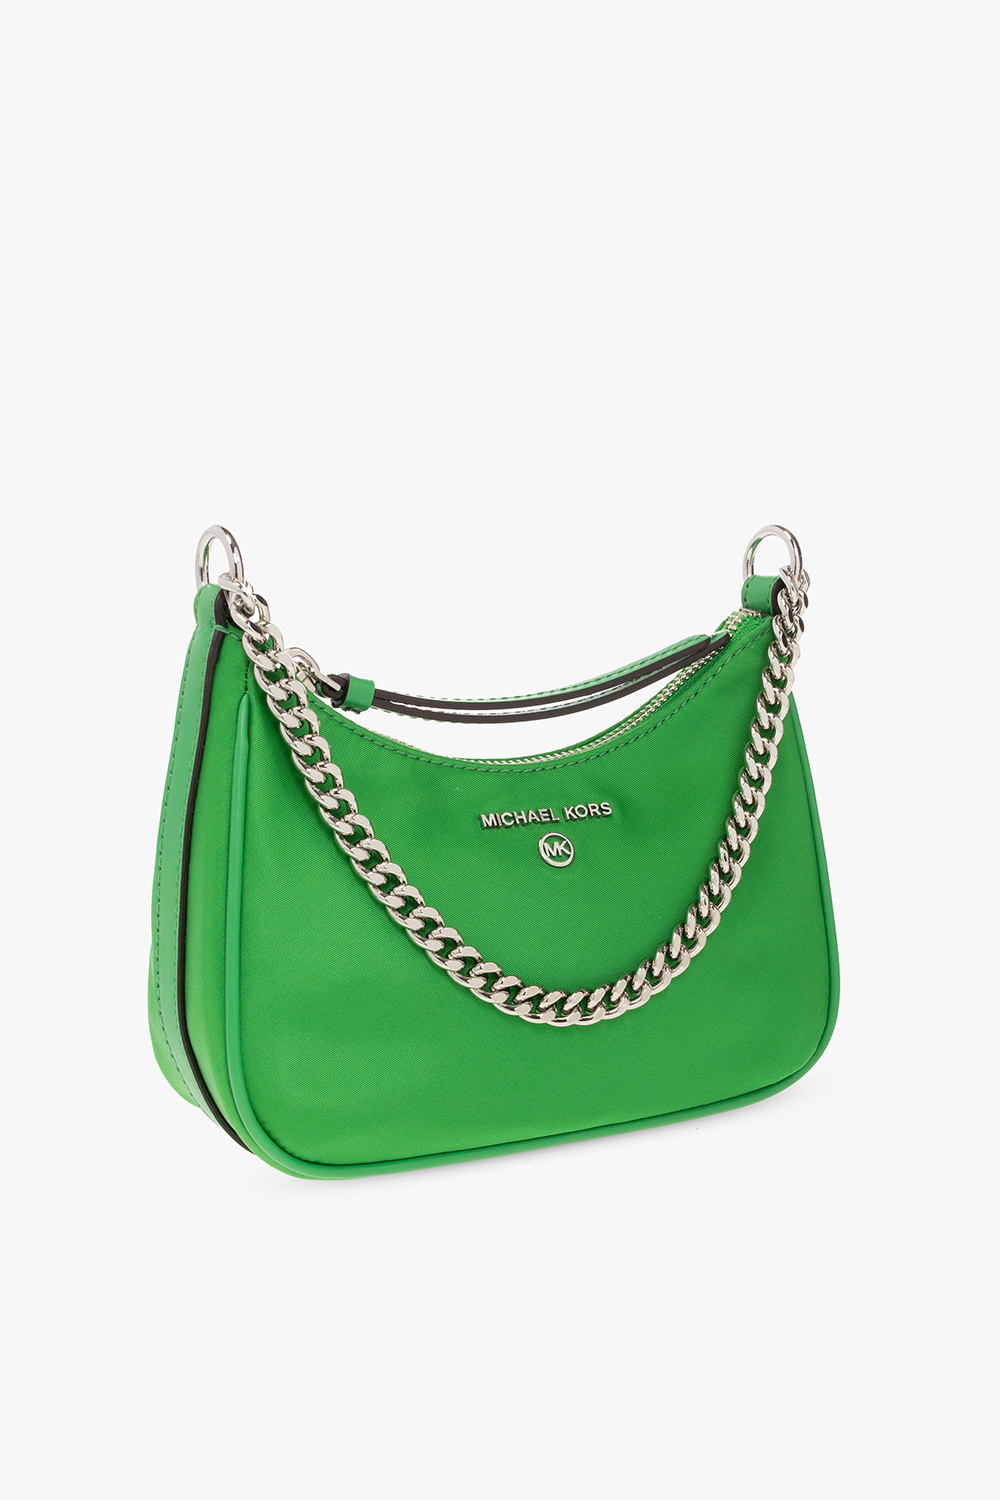 Michael Kors Jewel Green Jet Set Leather Front-Zip Chain Tote, Best Price  and Reviews